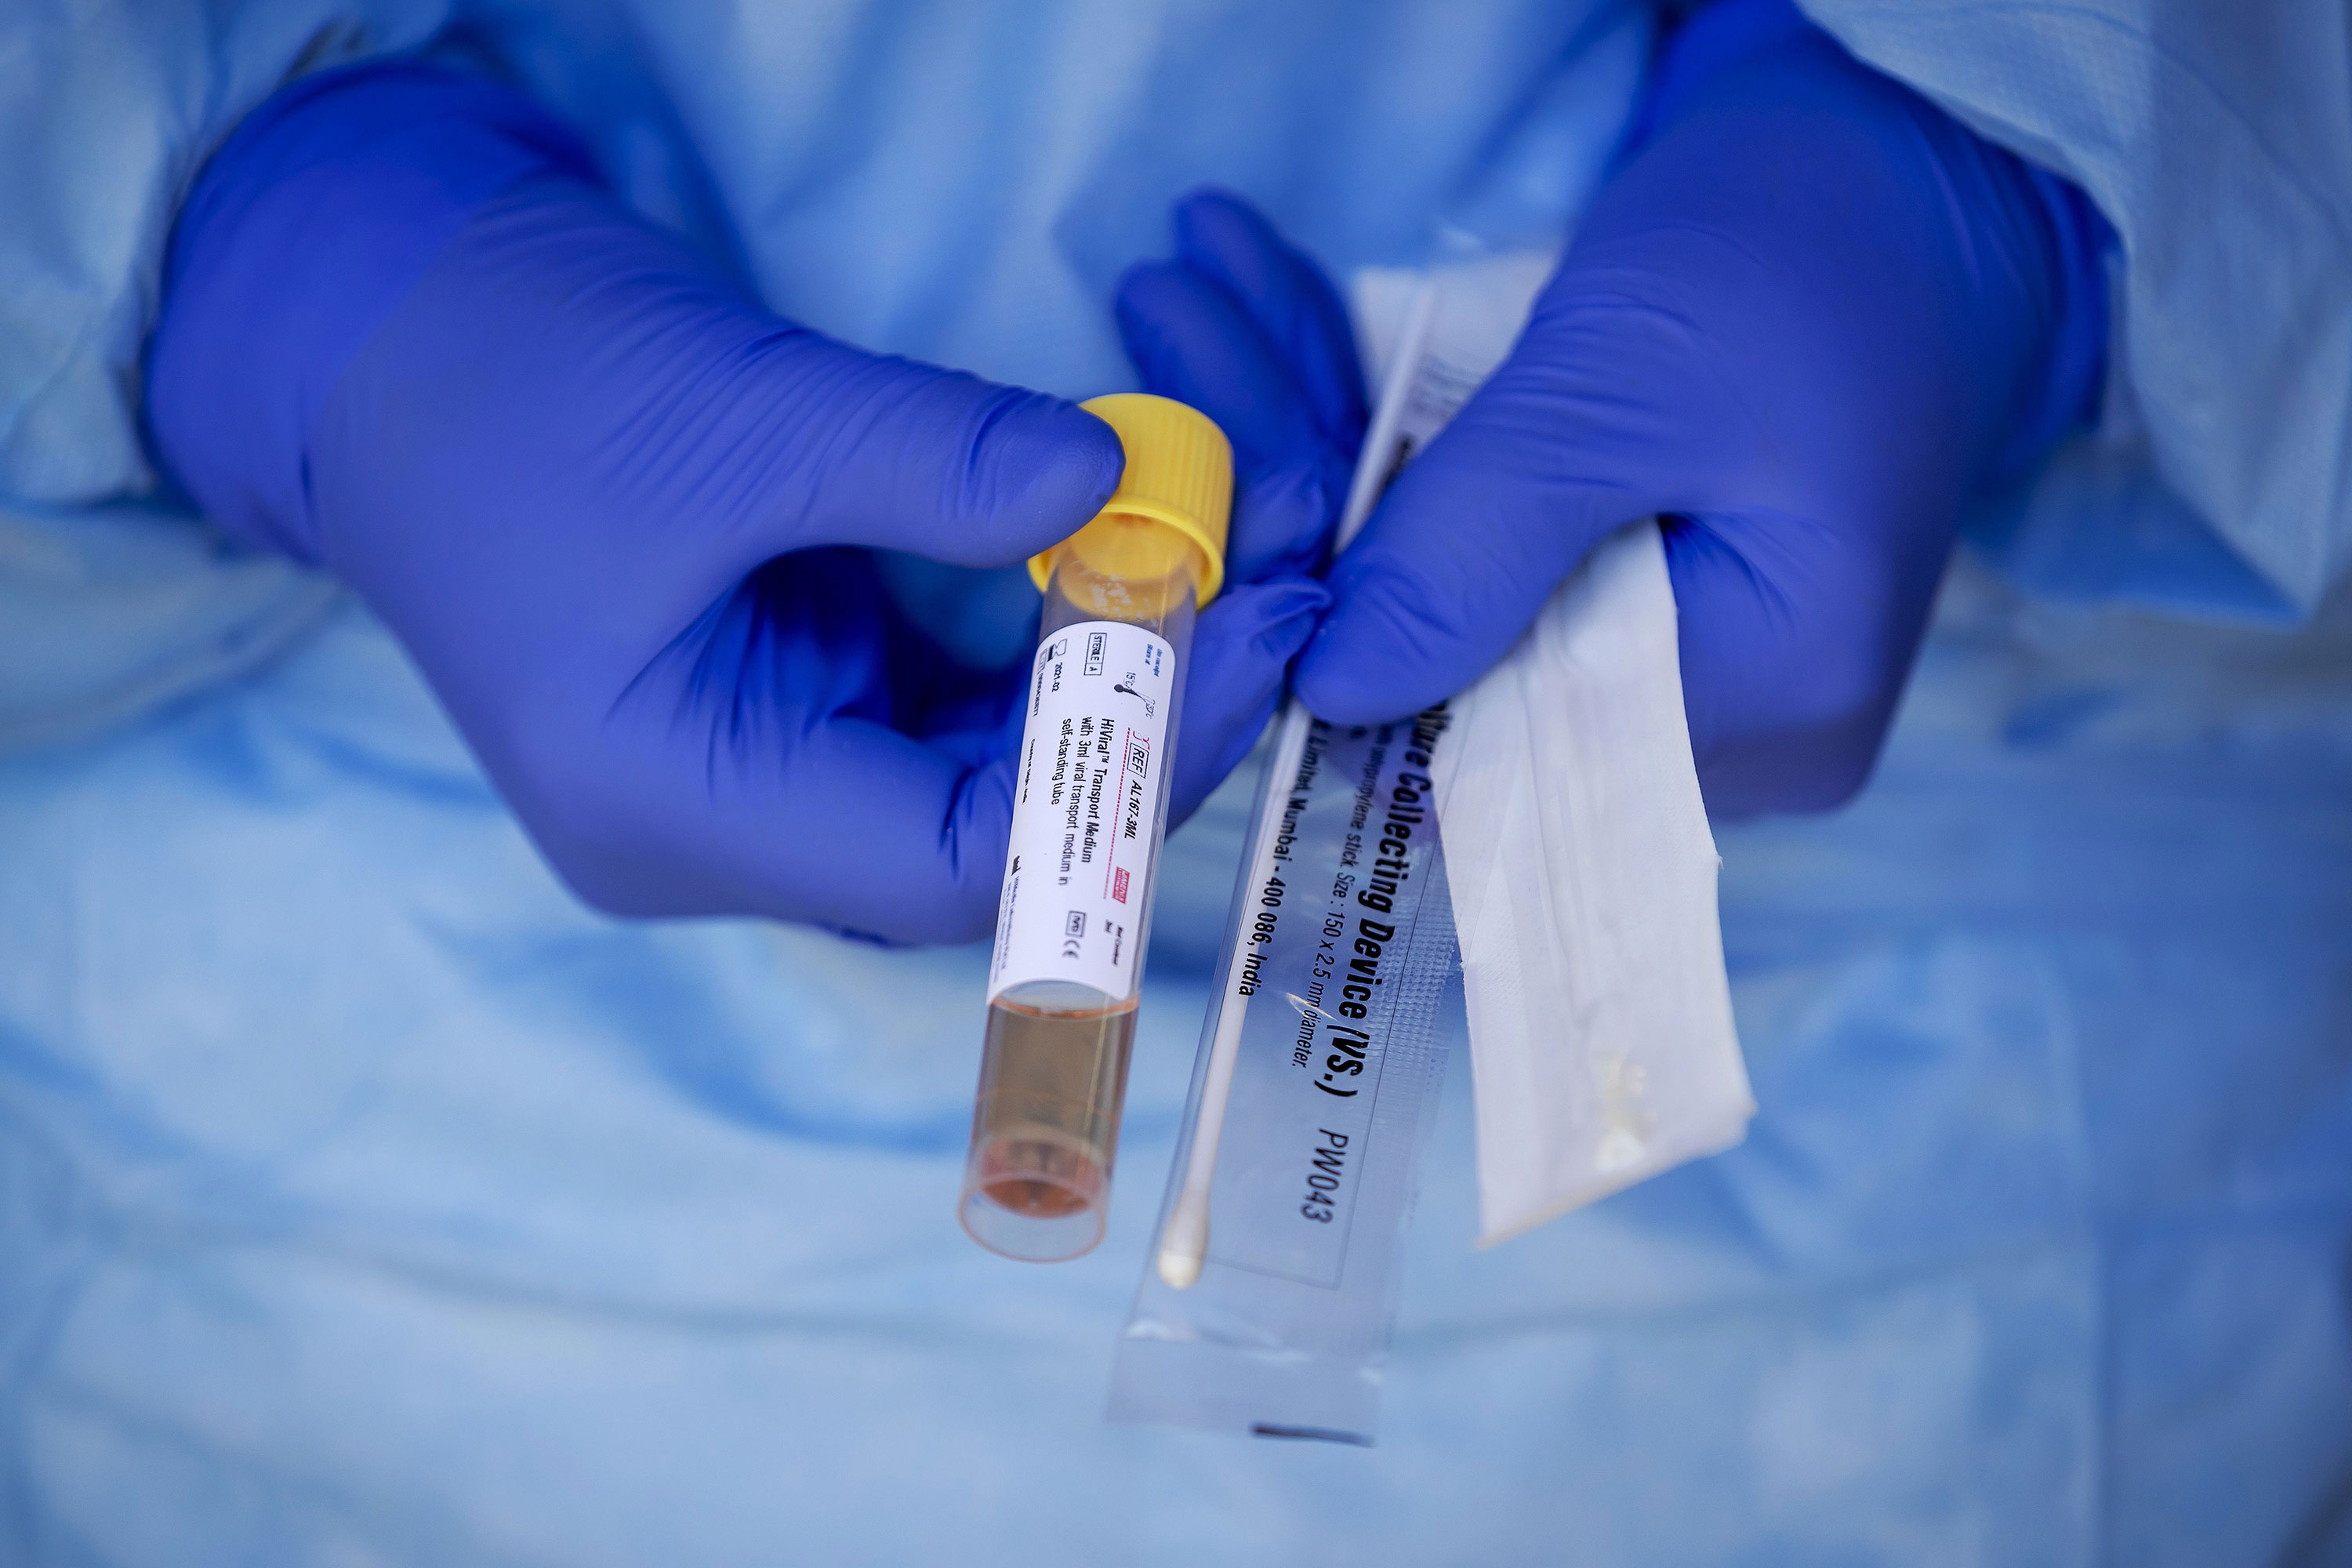 A coronavirus test kit is shown at the Amsterdam UMC in Amsterdam, Netherlands, on March 24.